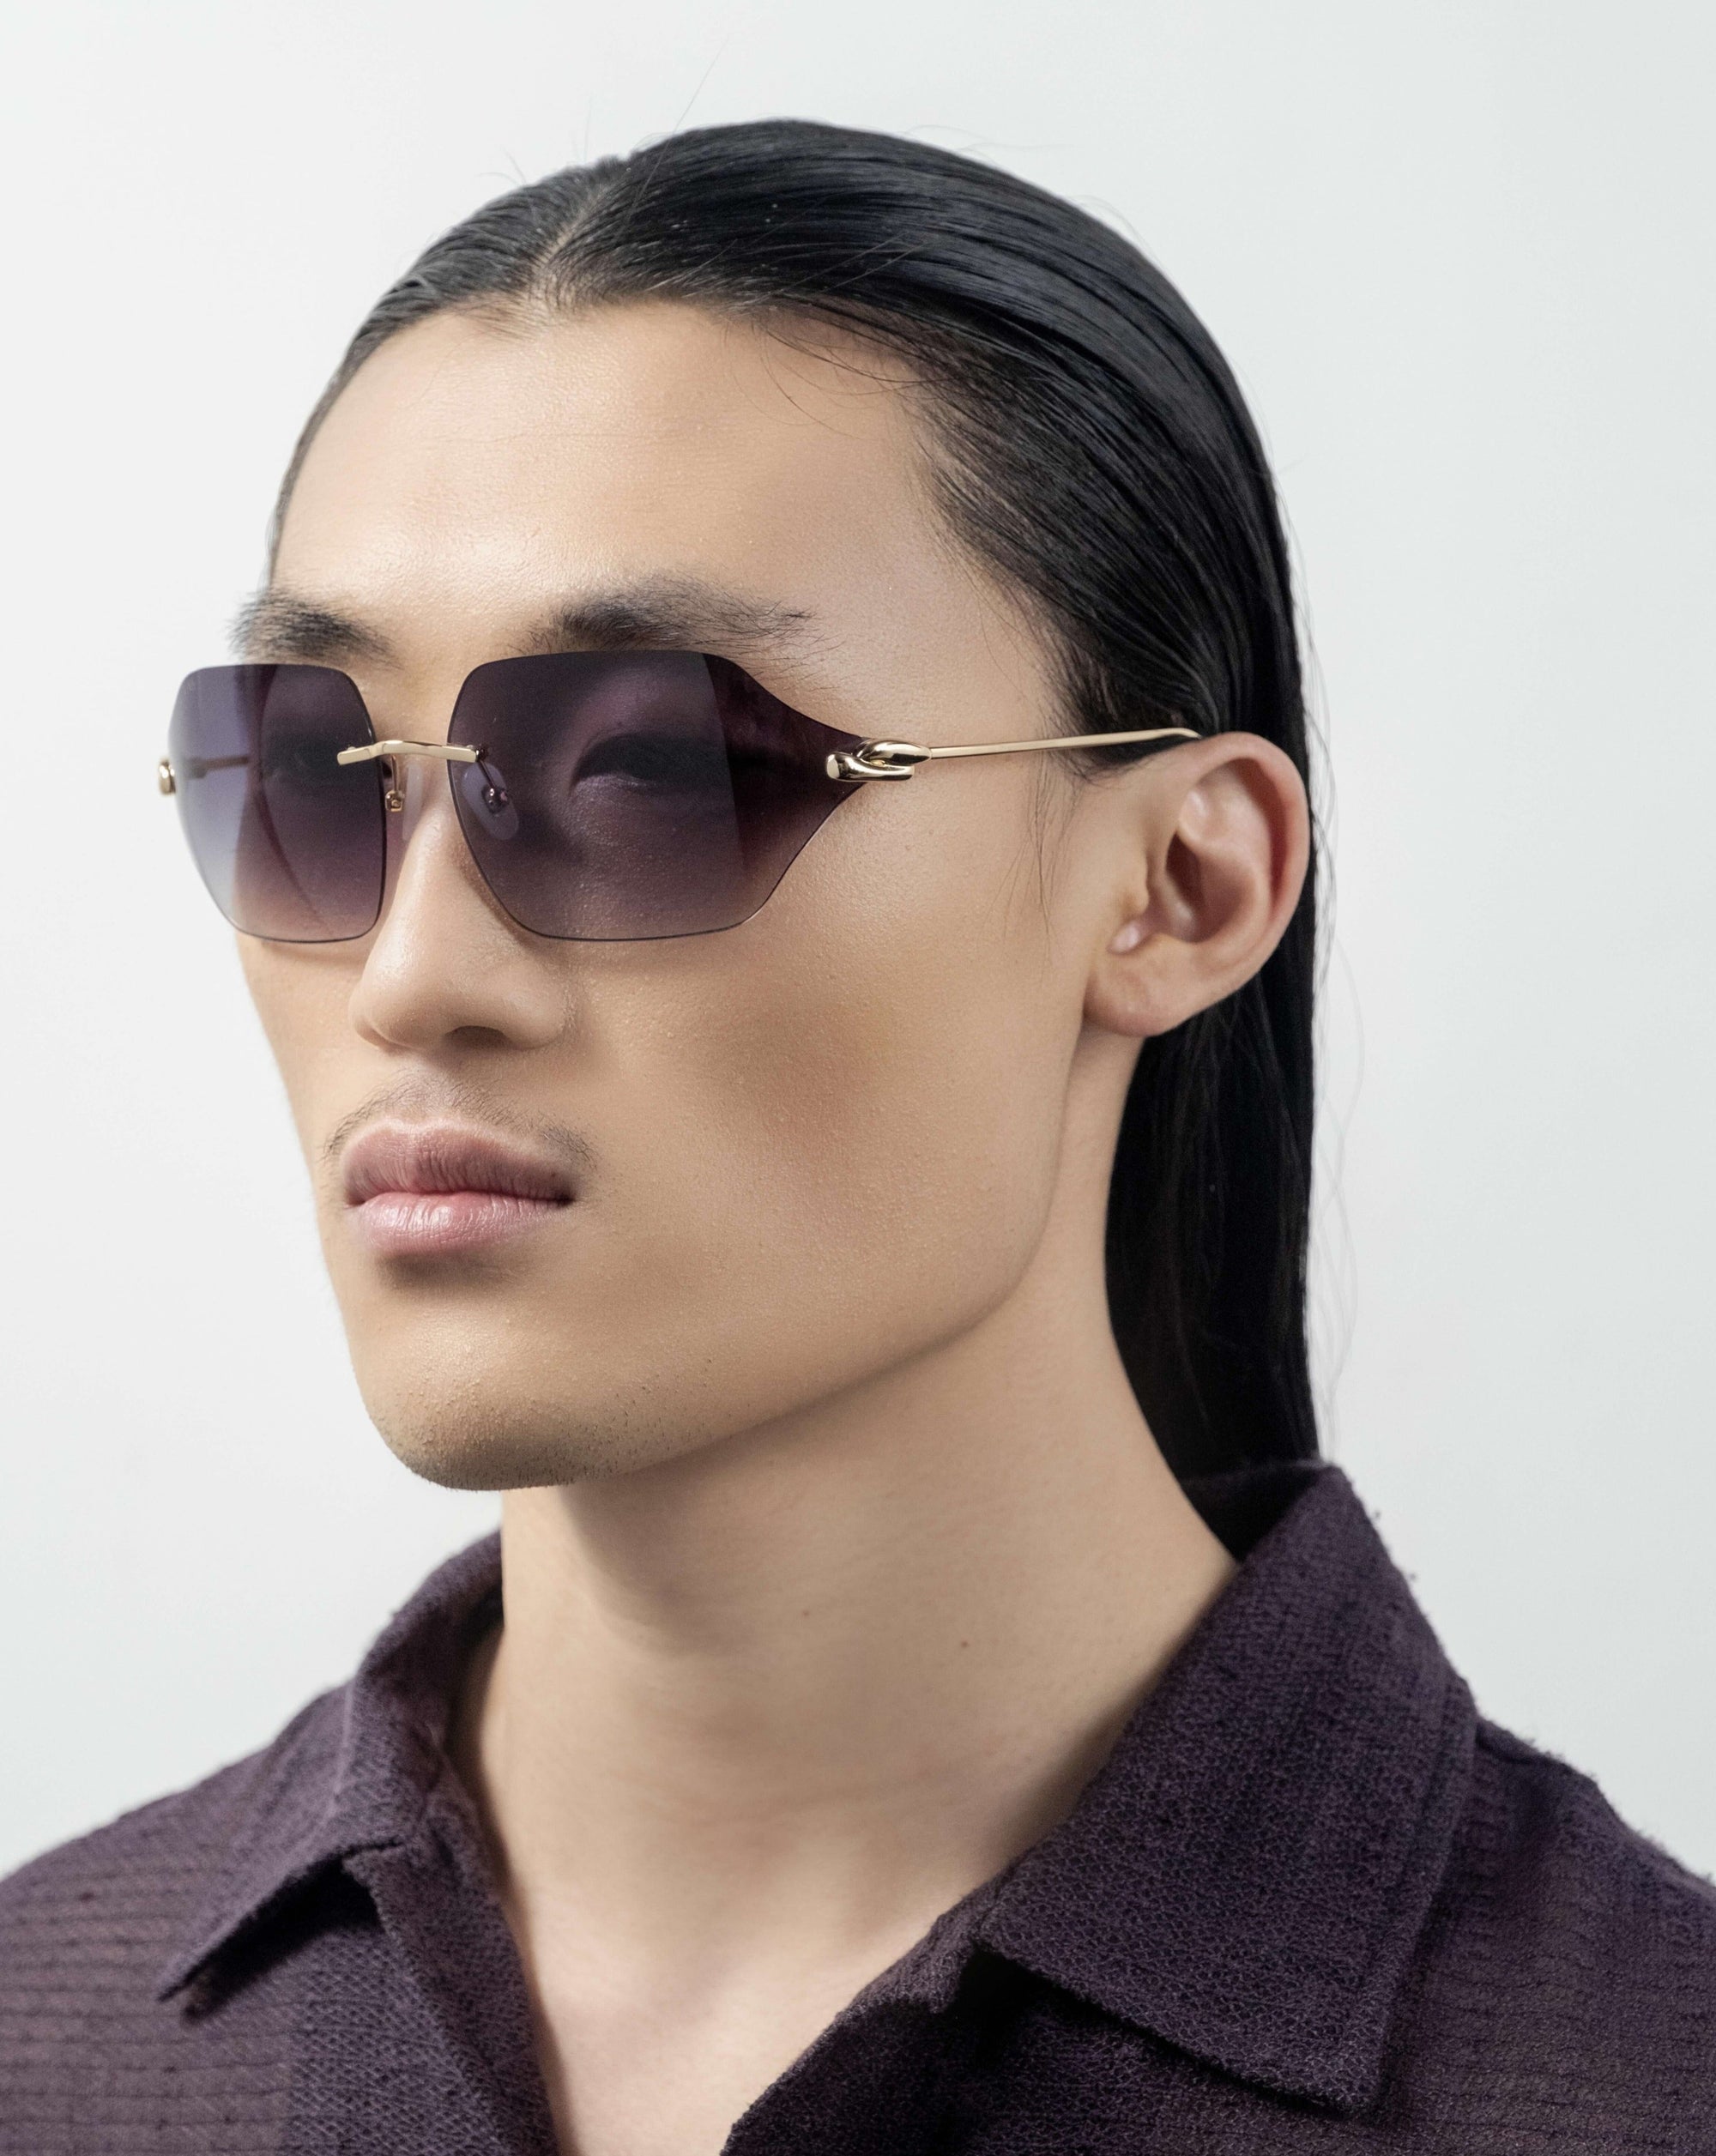 A person with long, dark hair wearing For Art&#39;s Sake® Serpent II sunglasses featuring a frameless wrap lens design and a dark textured shirt stares confidently ahead. The background is plain and white, emphasizing their serious expression and modern, stylish appearance.